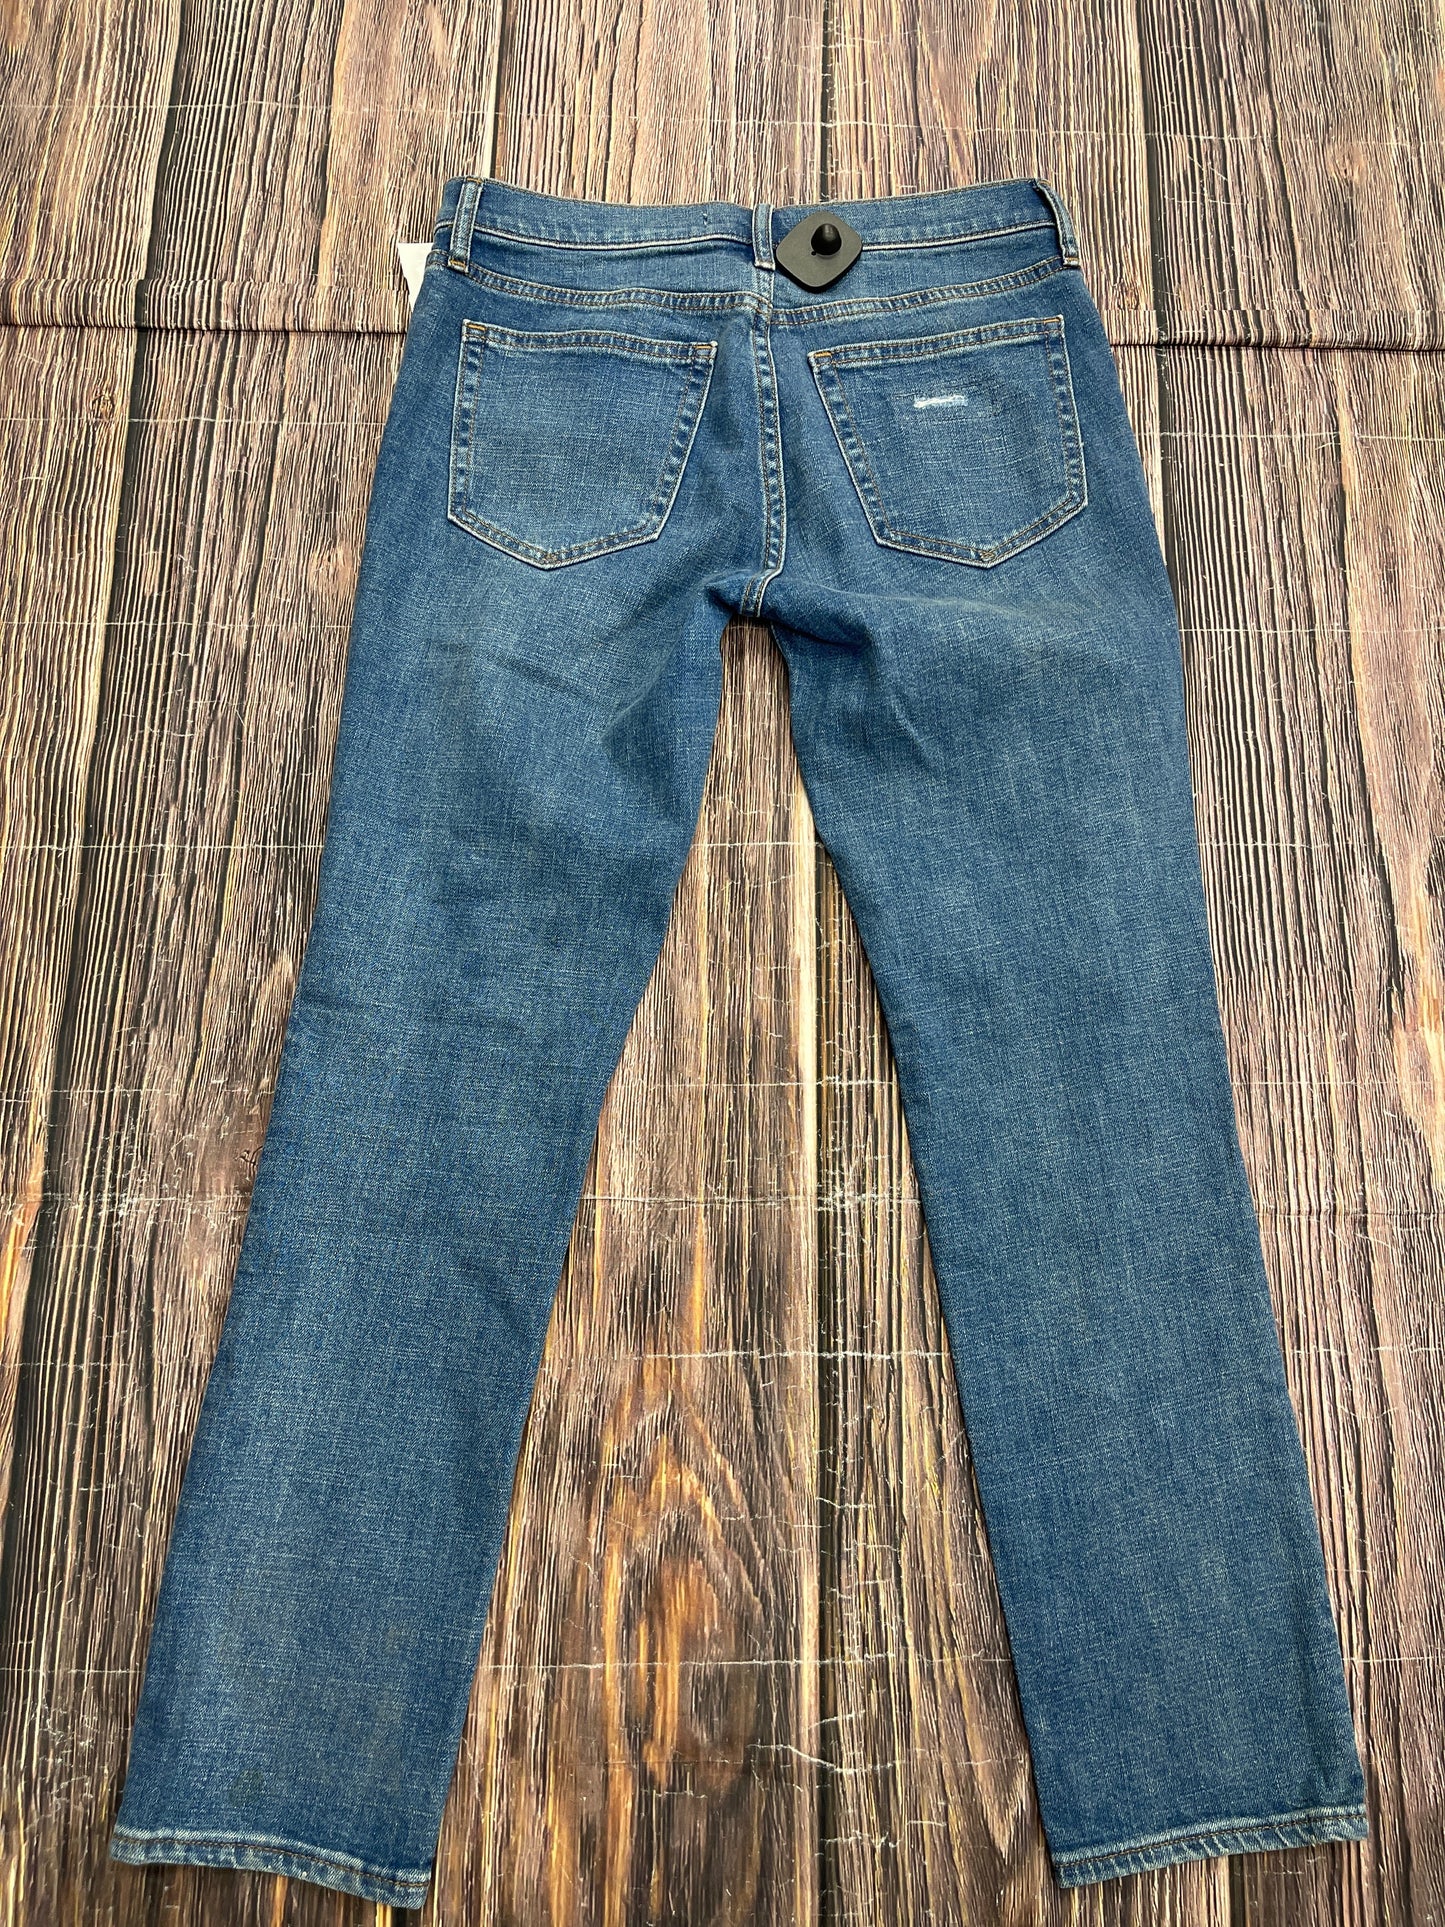 Jeans Straight By Gap  Size: 4 Short